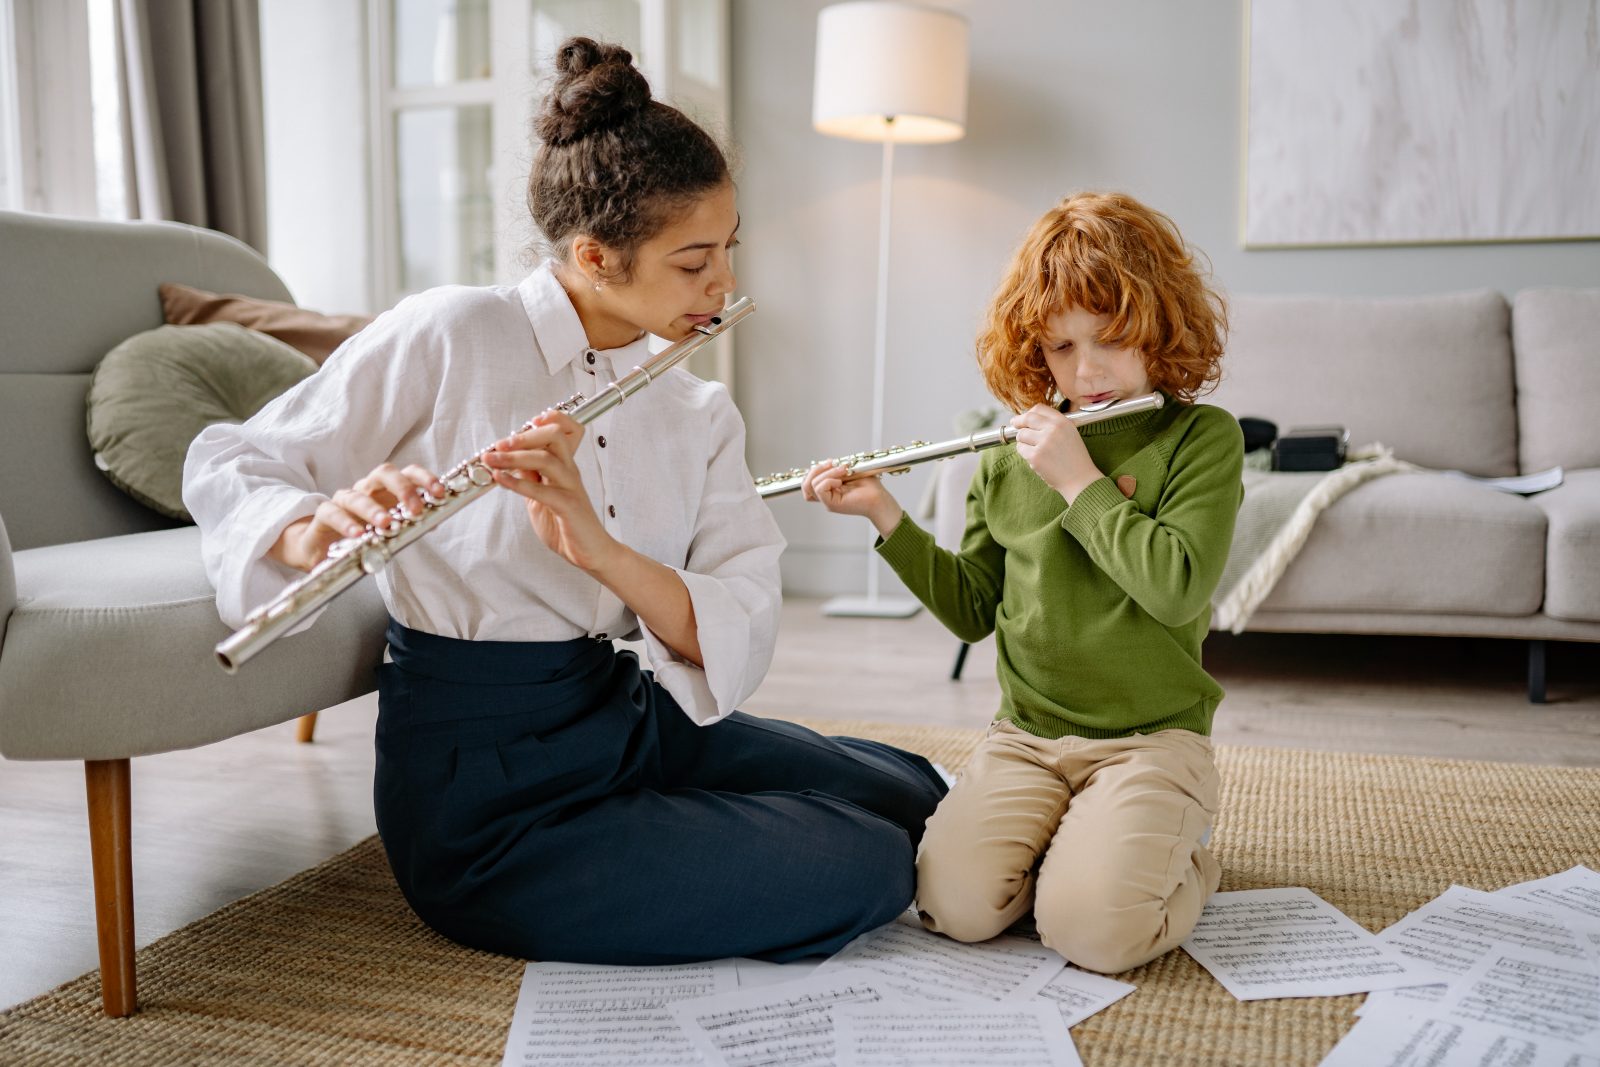 learning a musical instrument online